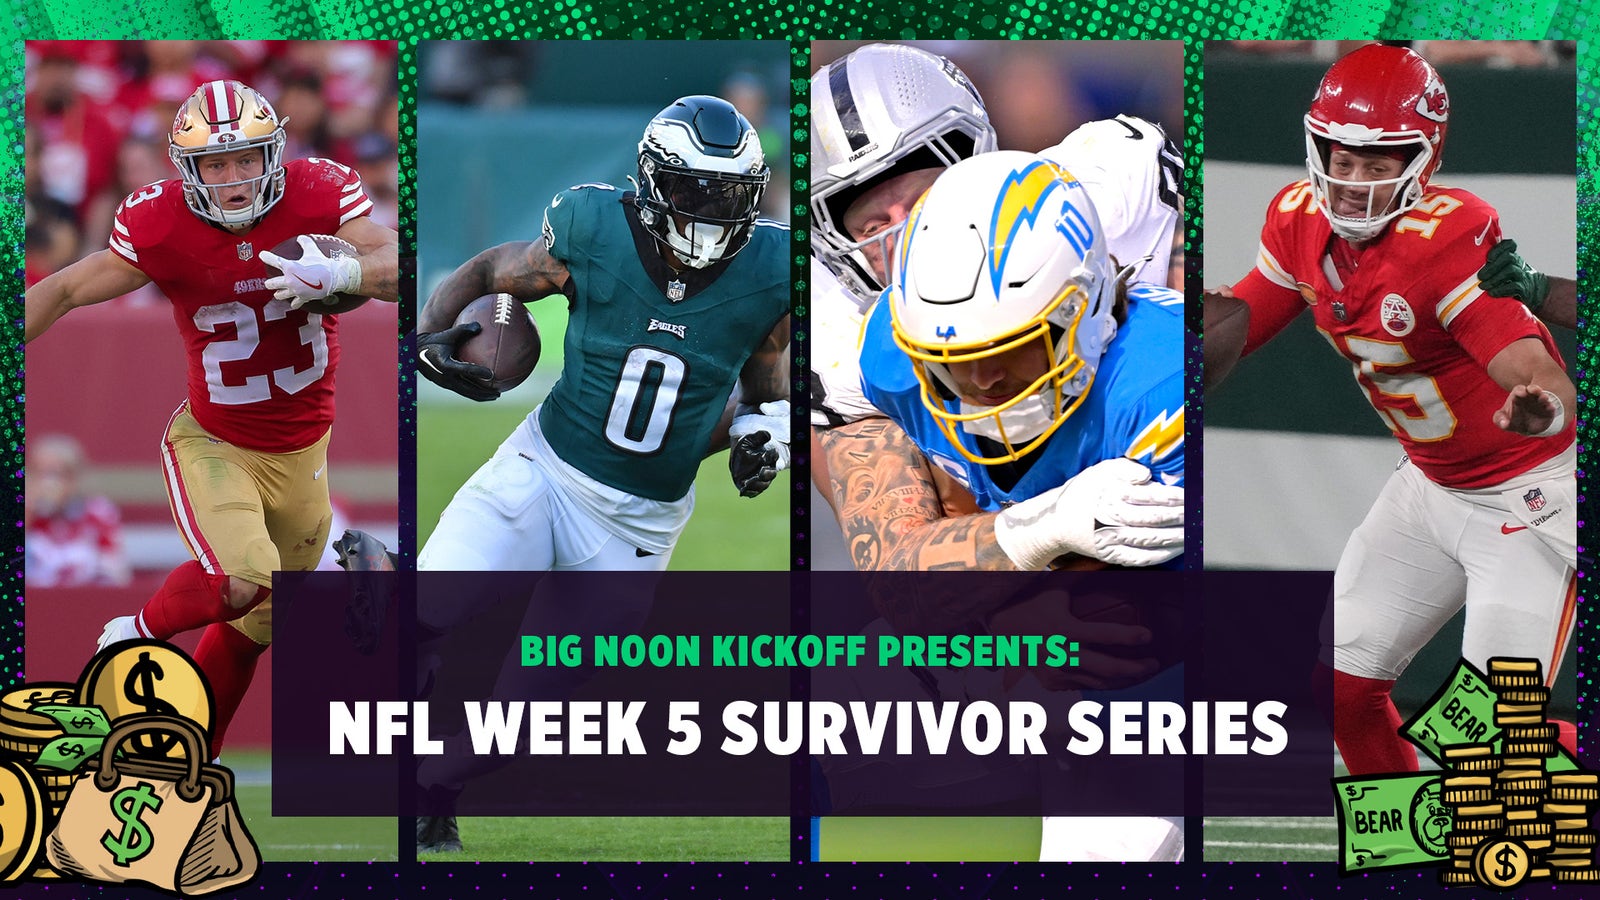 NFL Week 5 Survivor Picks: 49ers, Eagles, Chargers, Chiefs and more